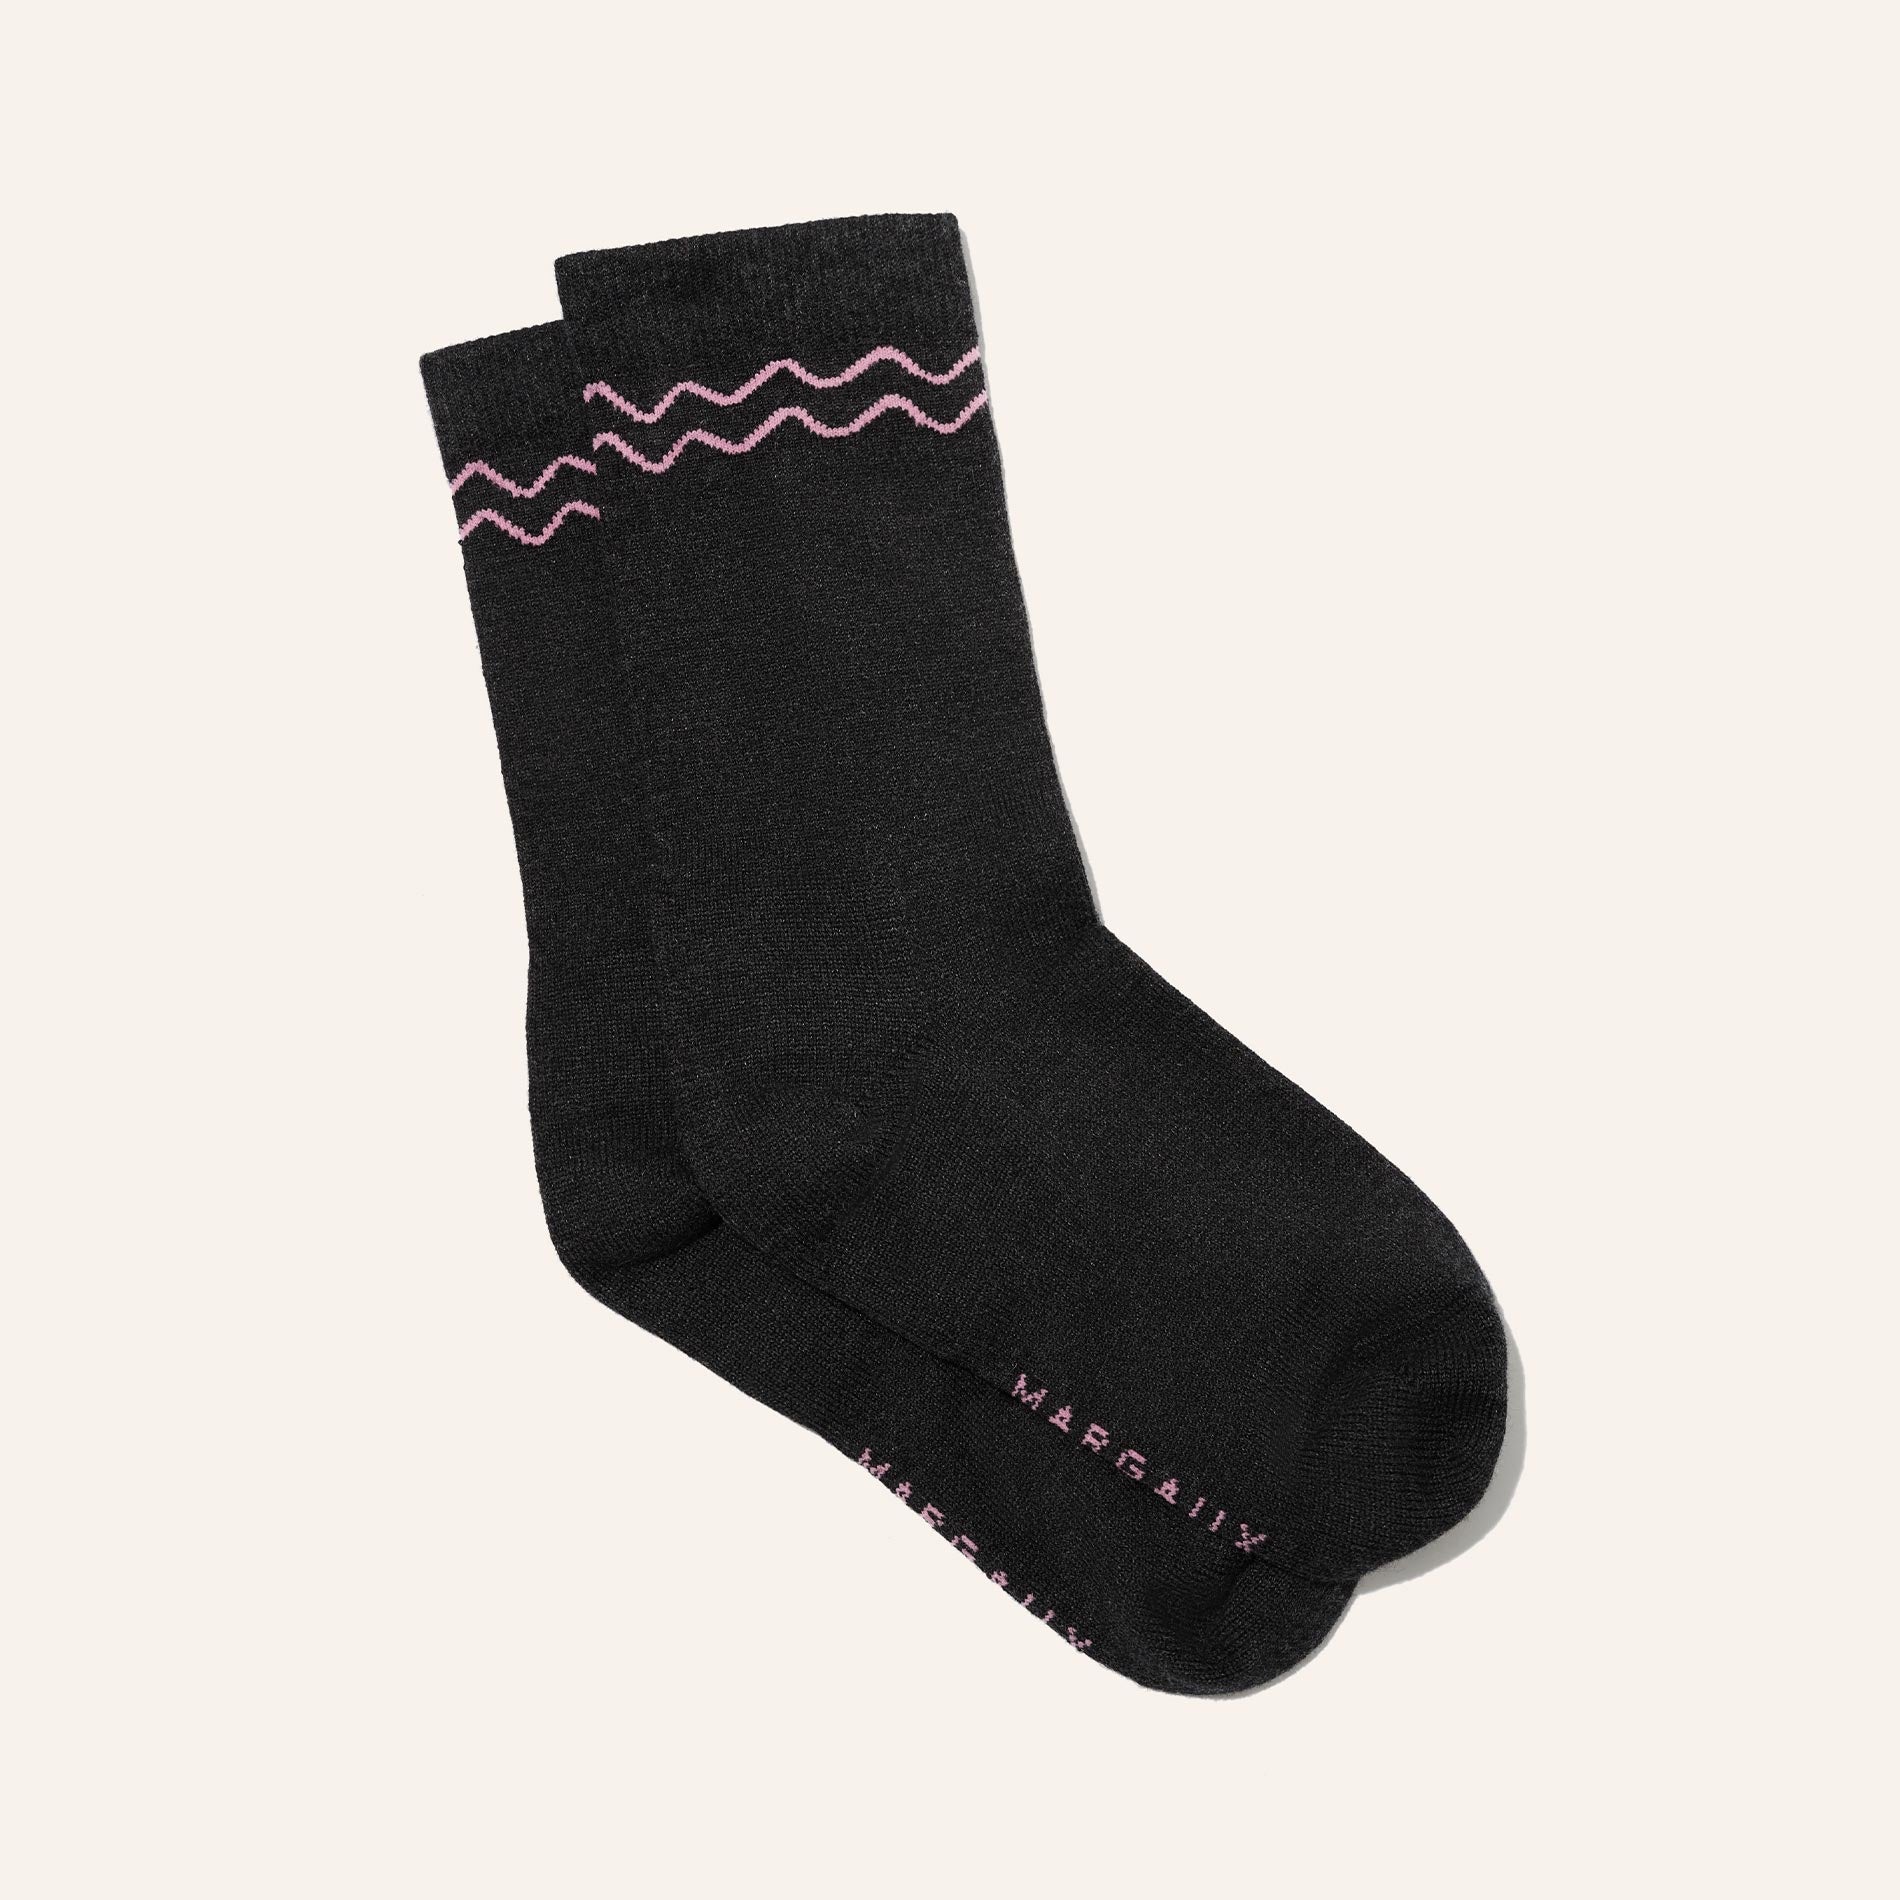 Margaux's Crew Sock in a charcoal grey cashmere-cotton blend, made for wear with boots